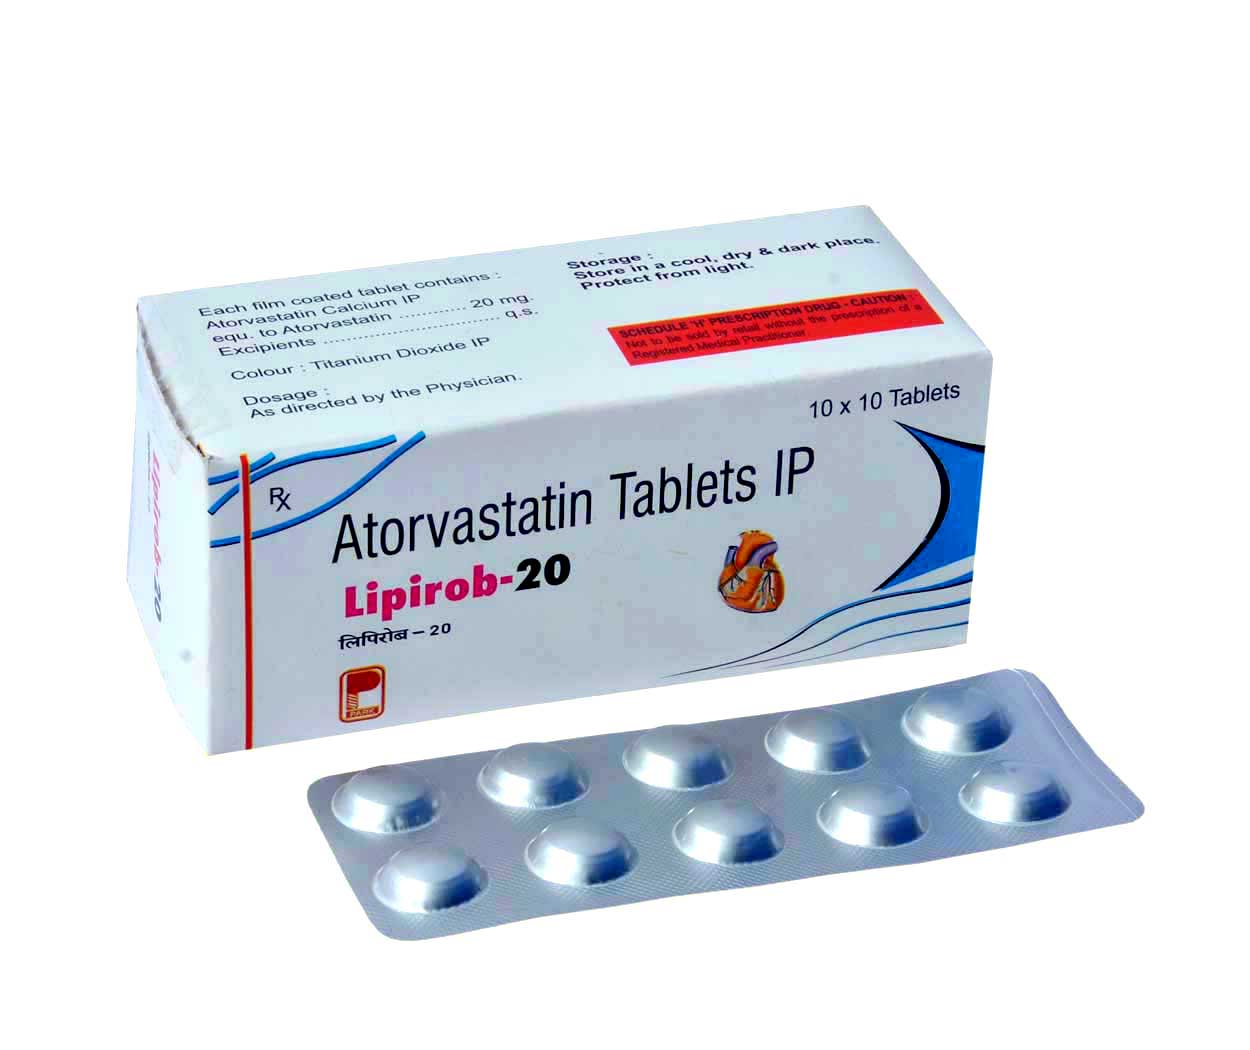 Product Name: Lipirob 20, Compositions of Lipirob 20 are Atorvastatin Tablets IP - Park Pharmaceuticals